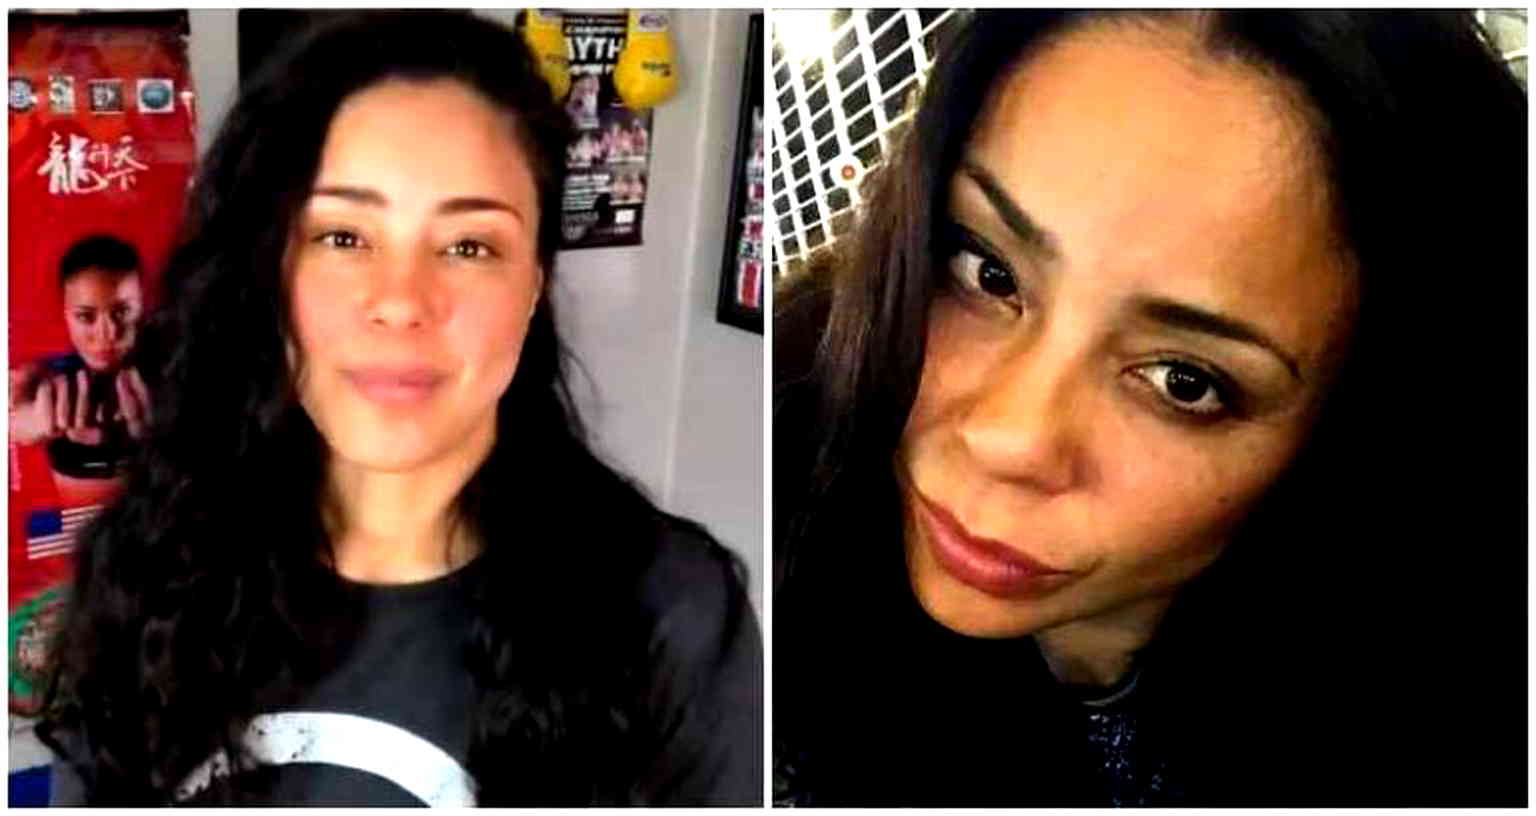 Japanese American MMA Fighter and ‘Queen of Mean’ Miriam Nakamoto to Debut in Action-Romance Film